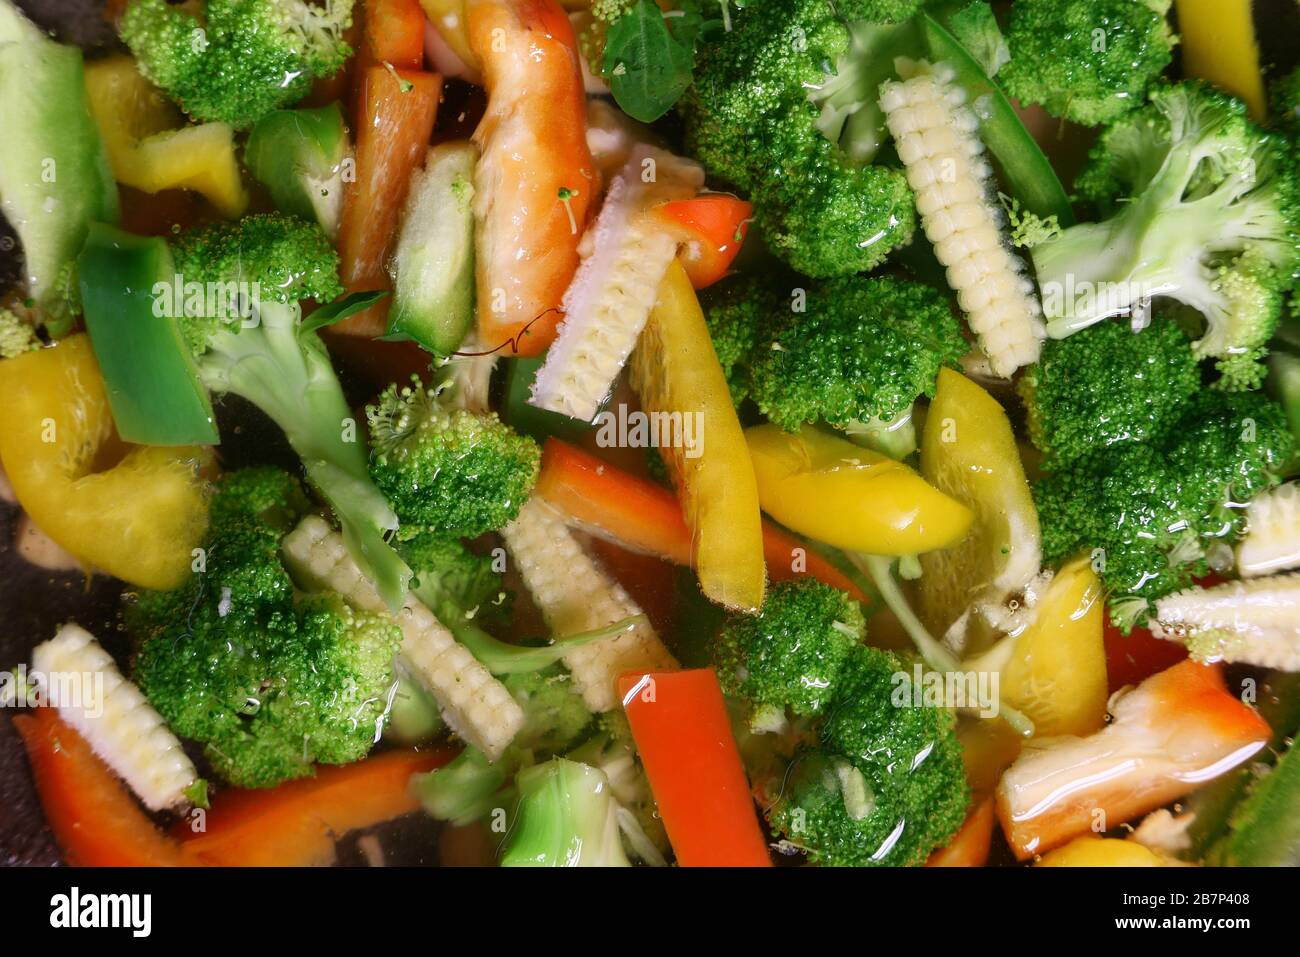 Healthy food. Greek salad with broccoli, tomato, sweet pepper, Stock Photo